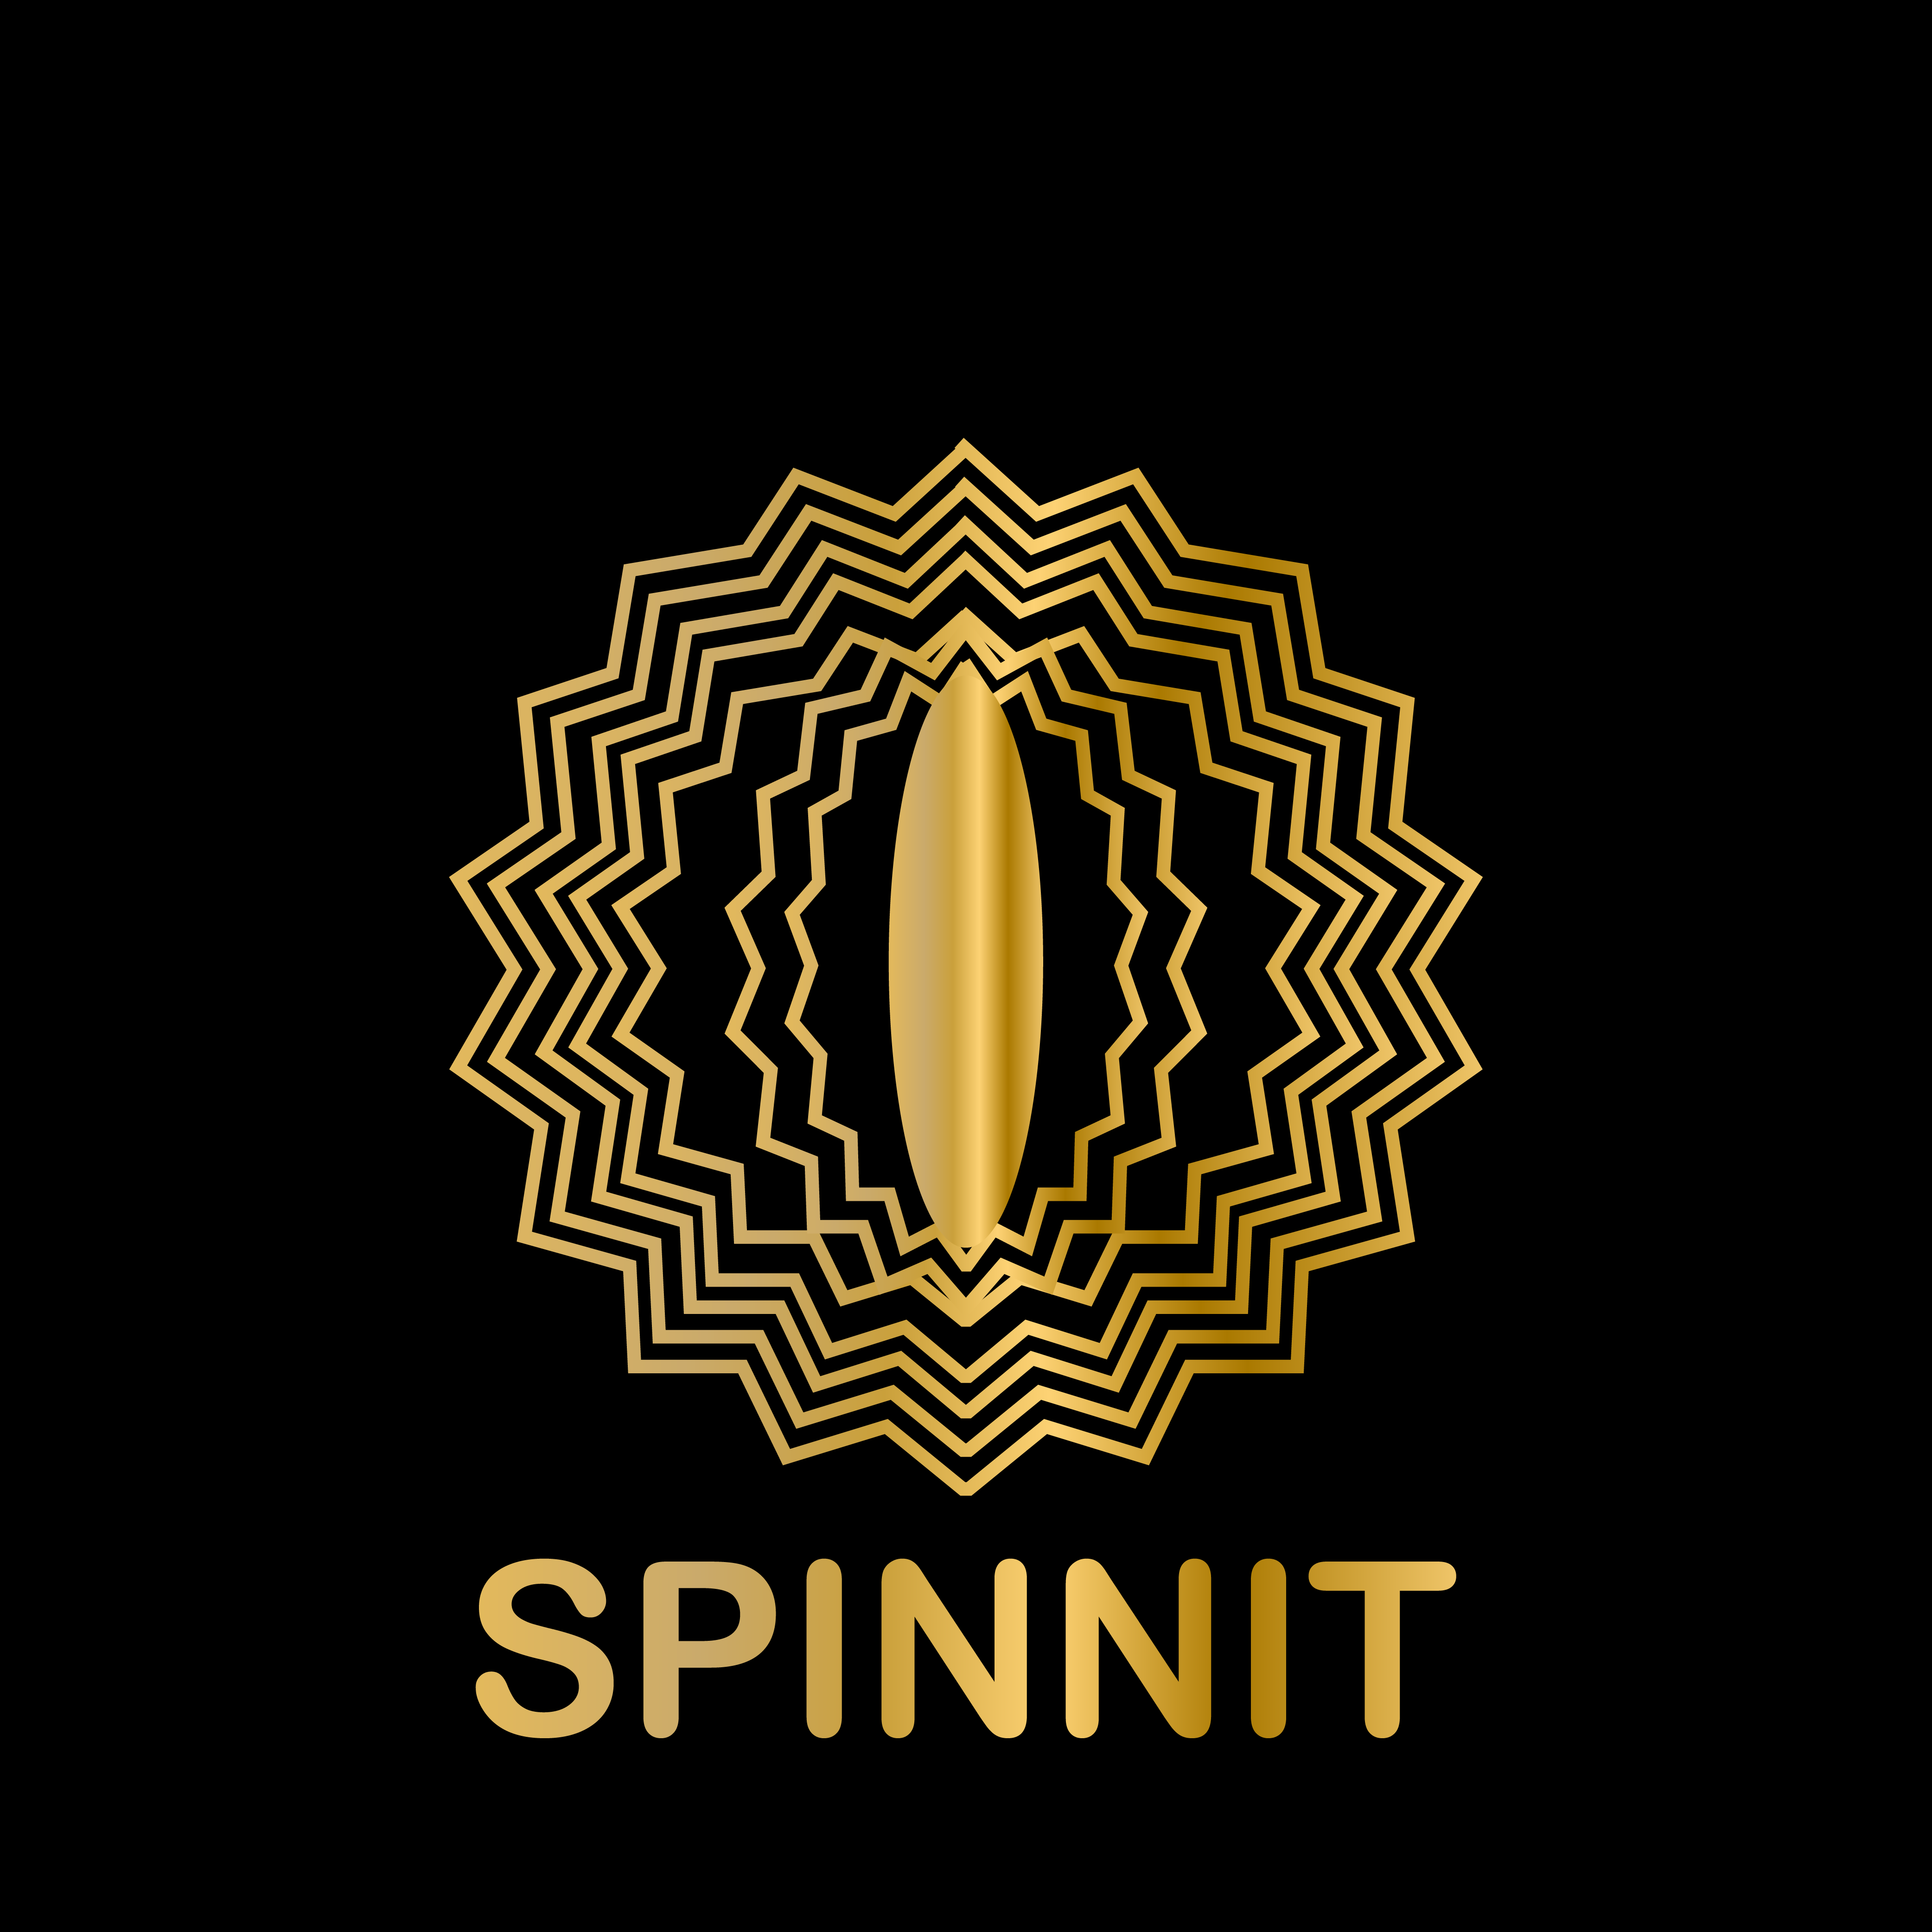 Spinnit